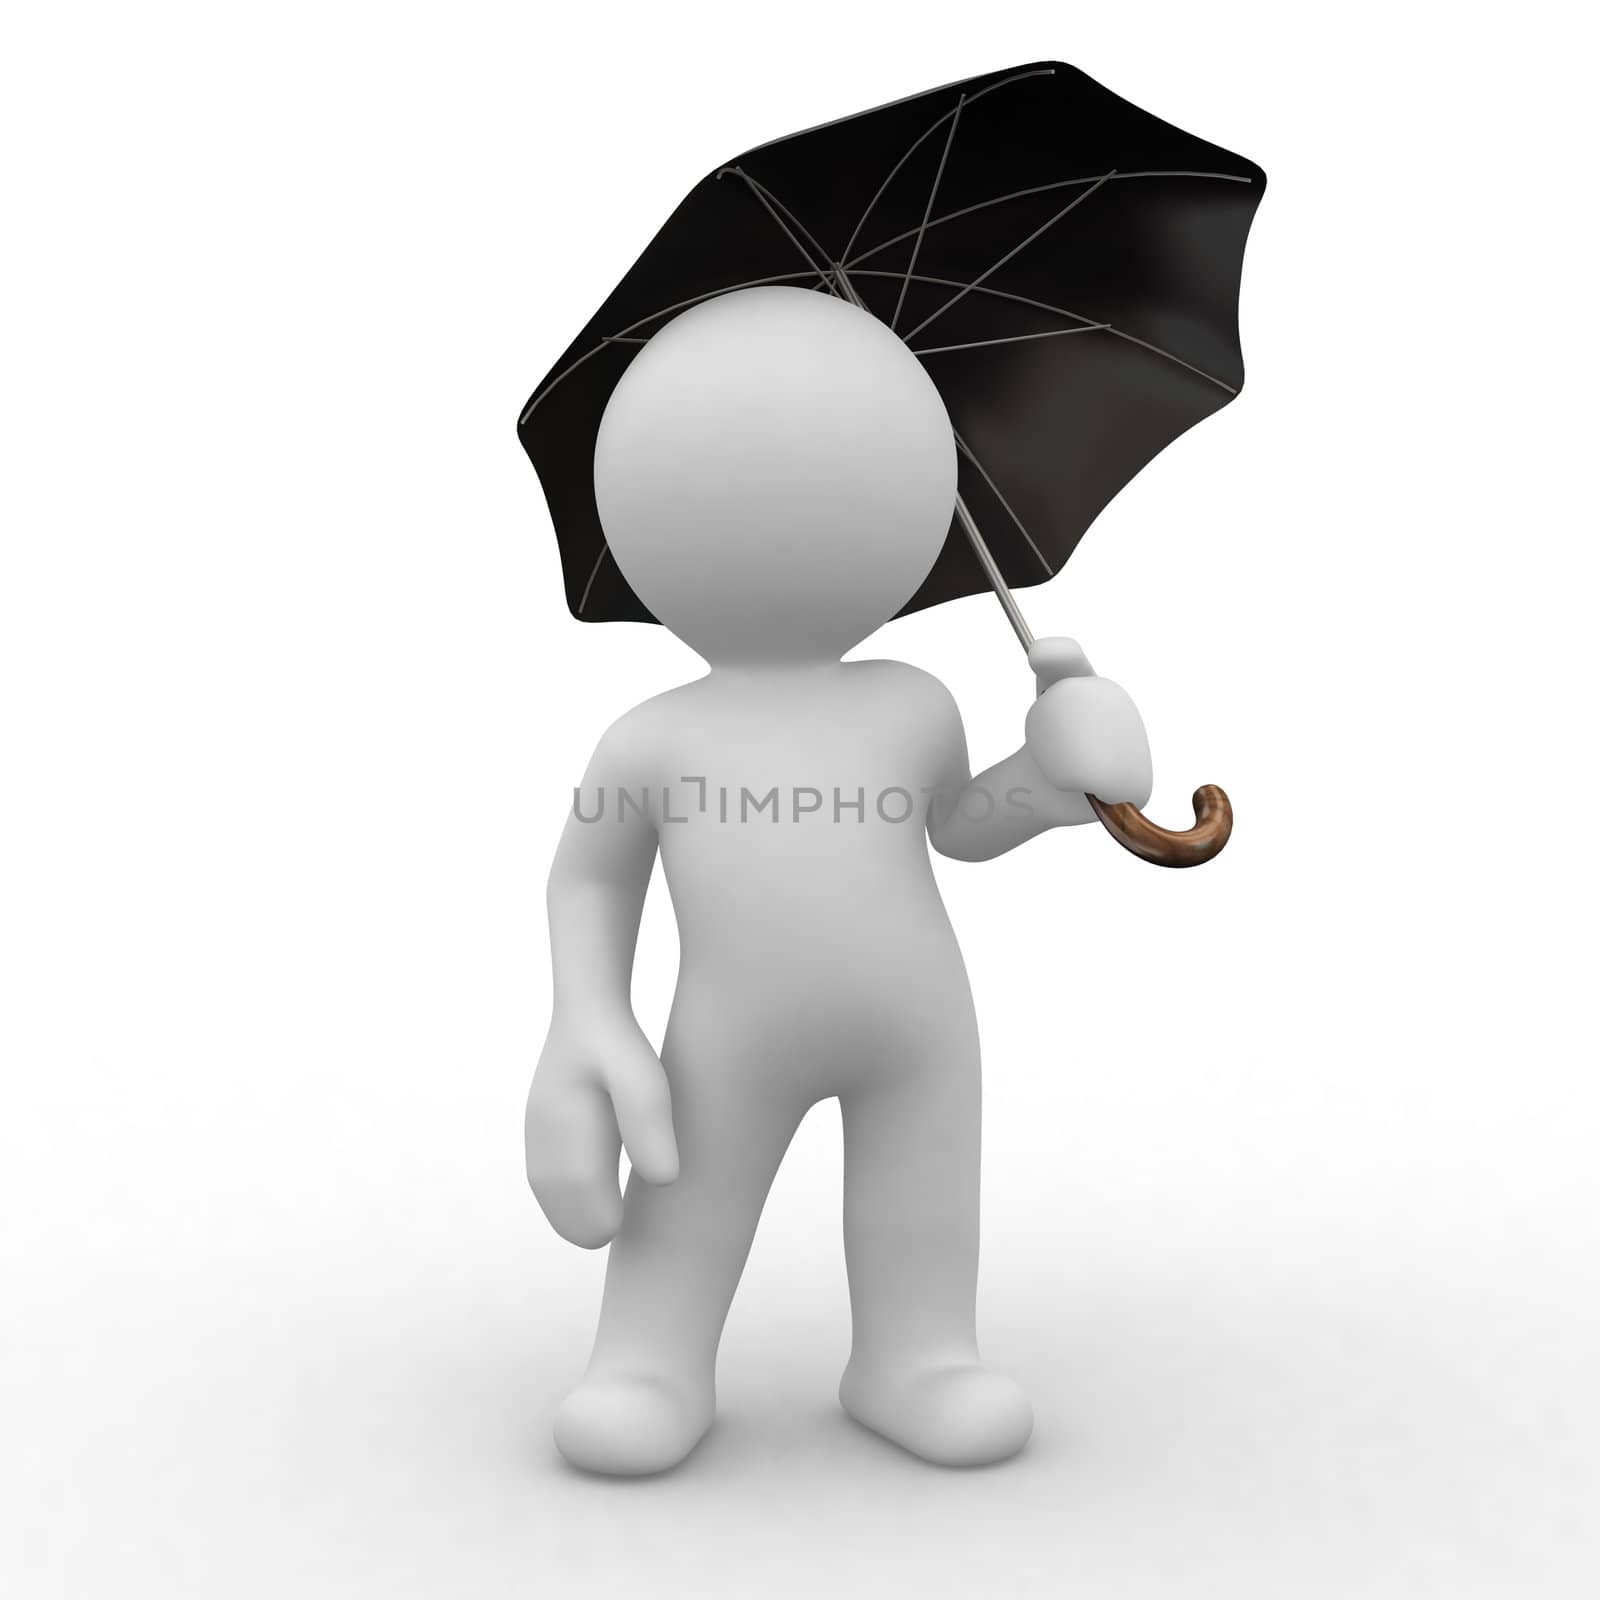 little human that hold an umbrella for protection